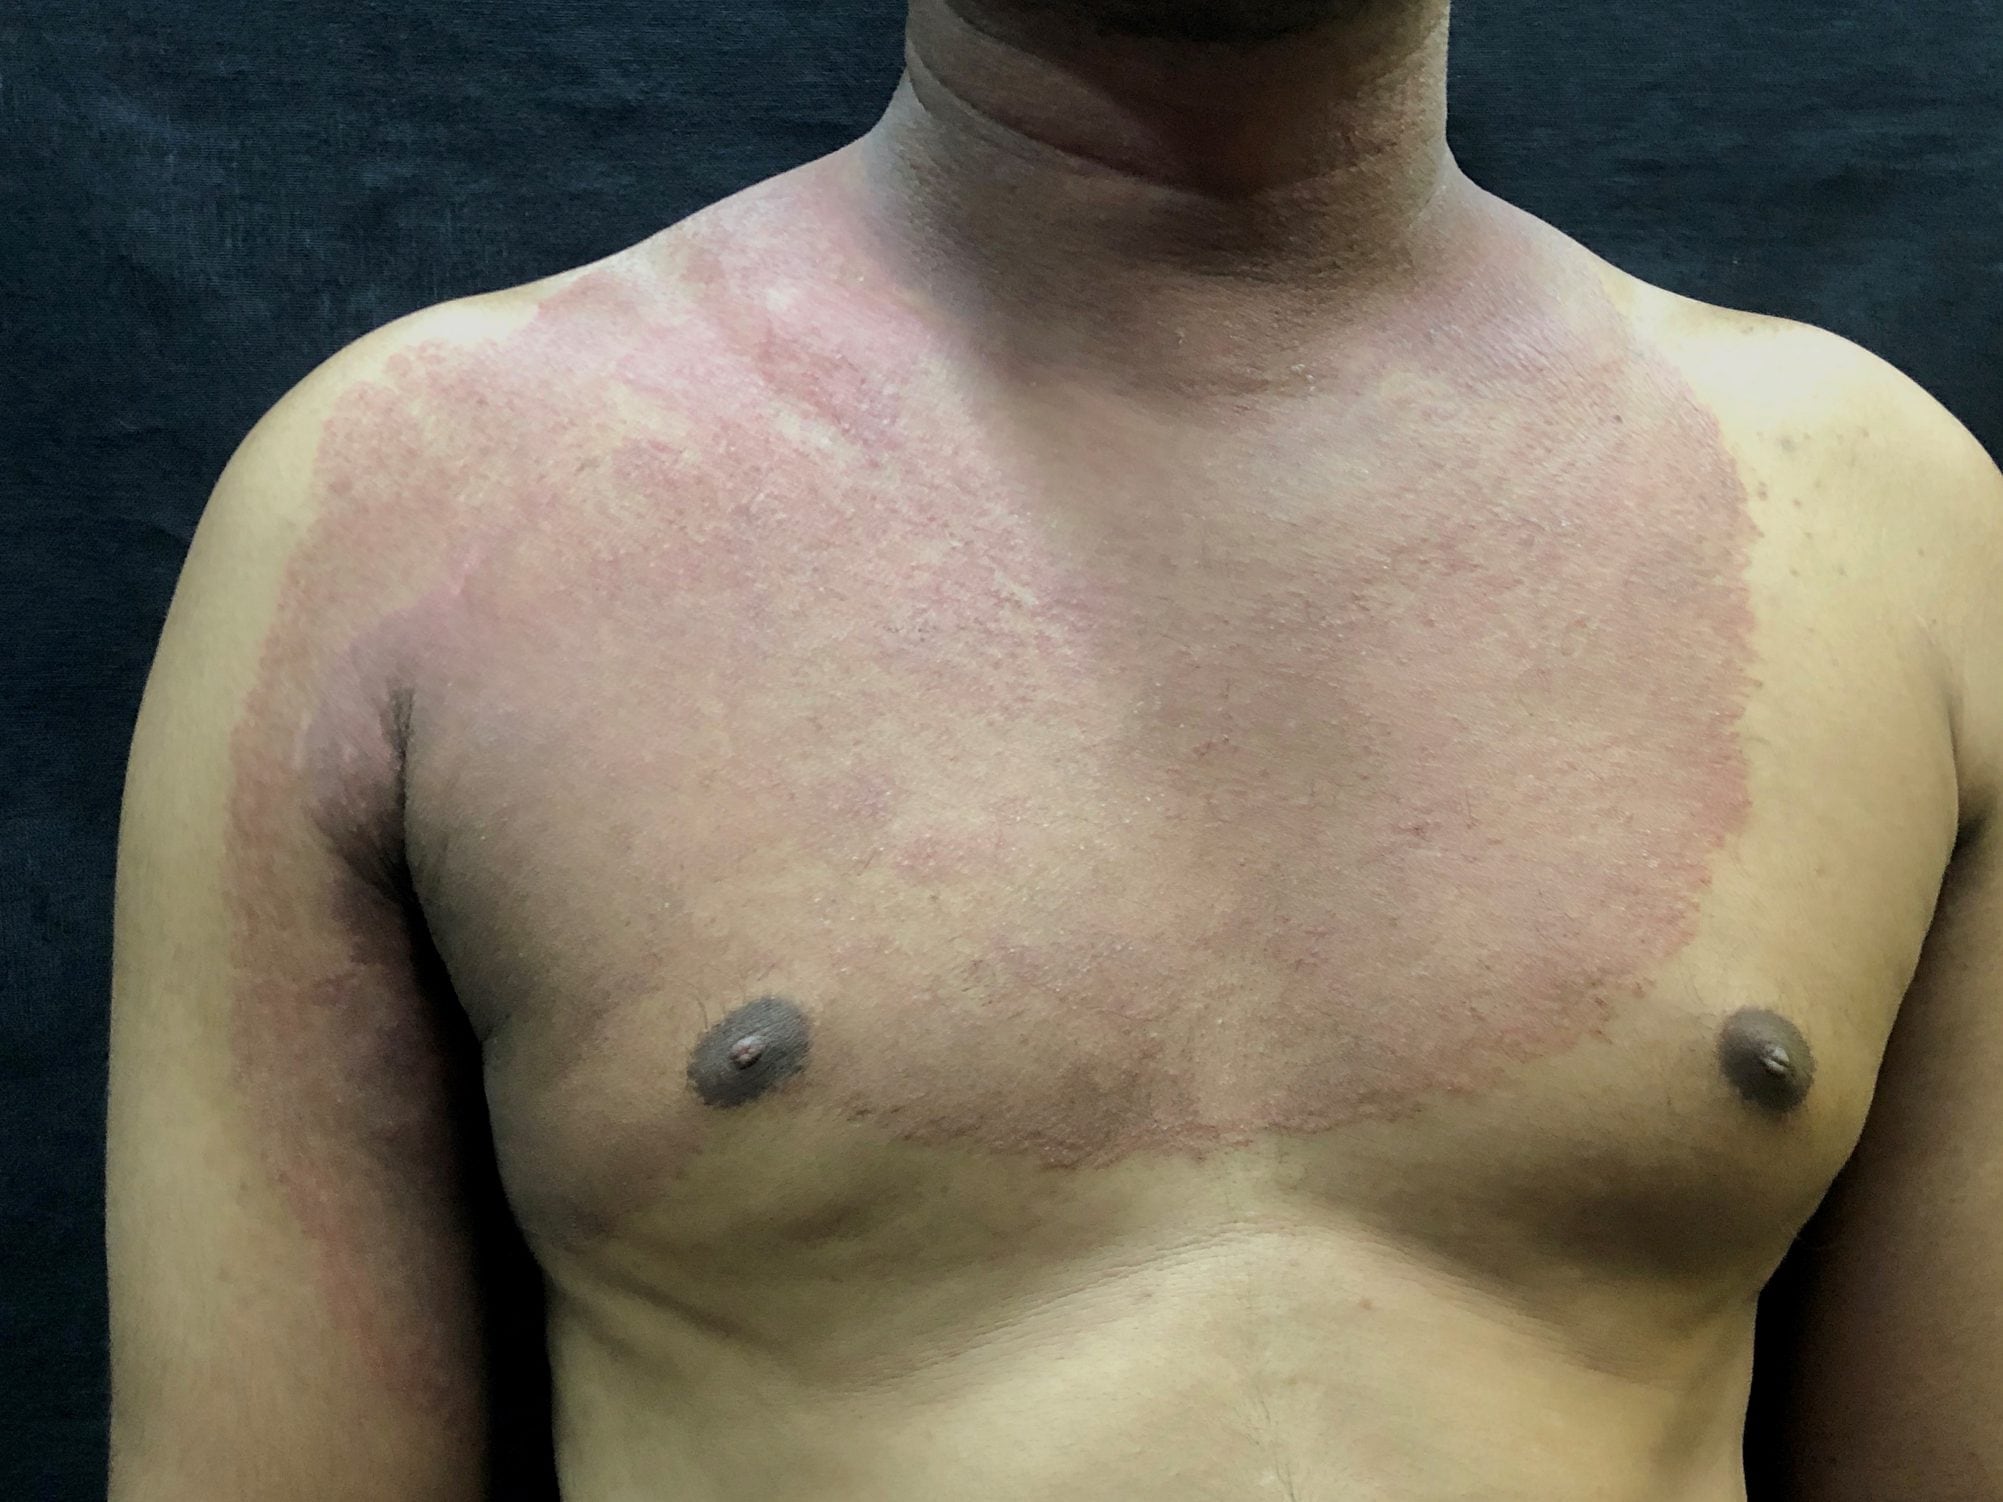 Ringworm rash from corticosteroid use covering a person’s upper body, neck, and arm.